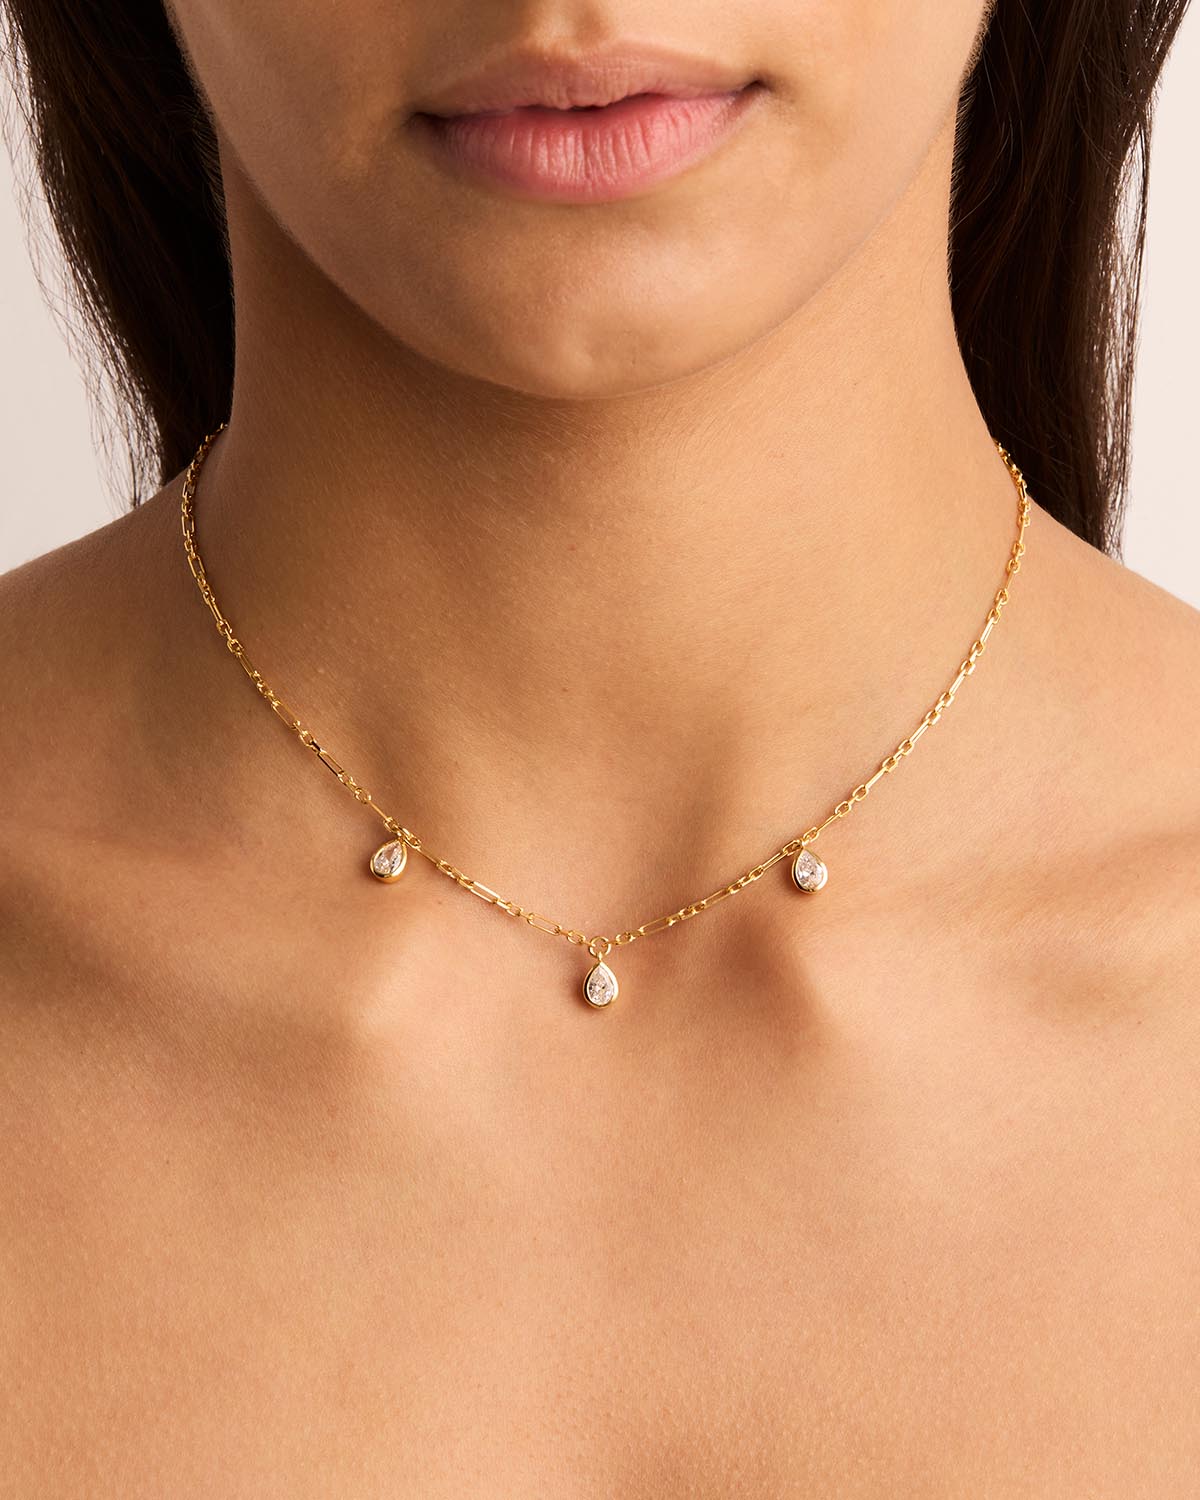 Frankly Casual Necklace in Rose Gold | iCLOTHING - iCLOTHING